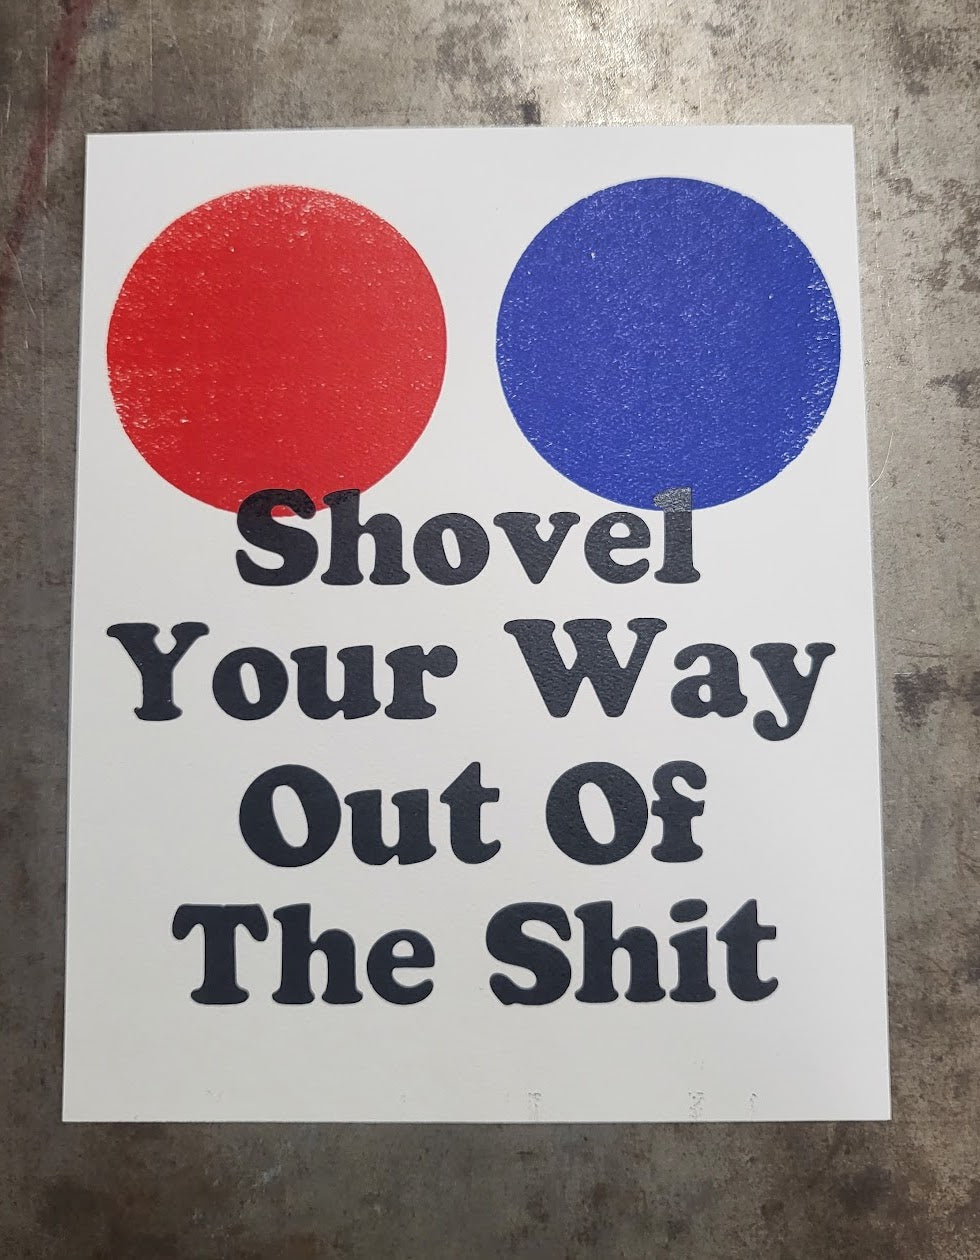 "Shovel Your Way Out Of The Shit" Twin Peaks inspired letterpress print